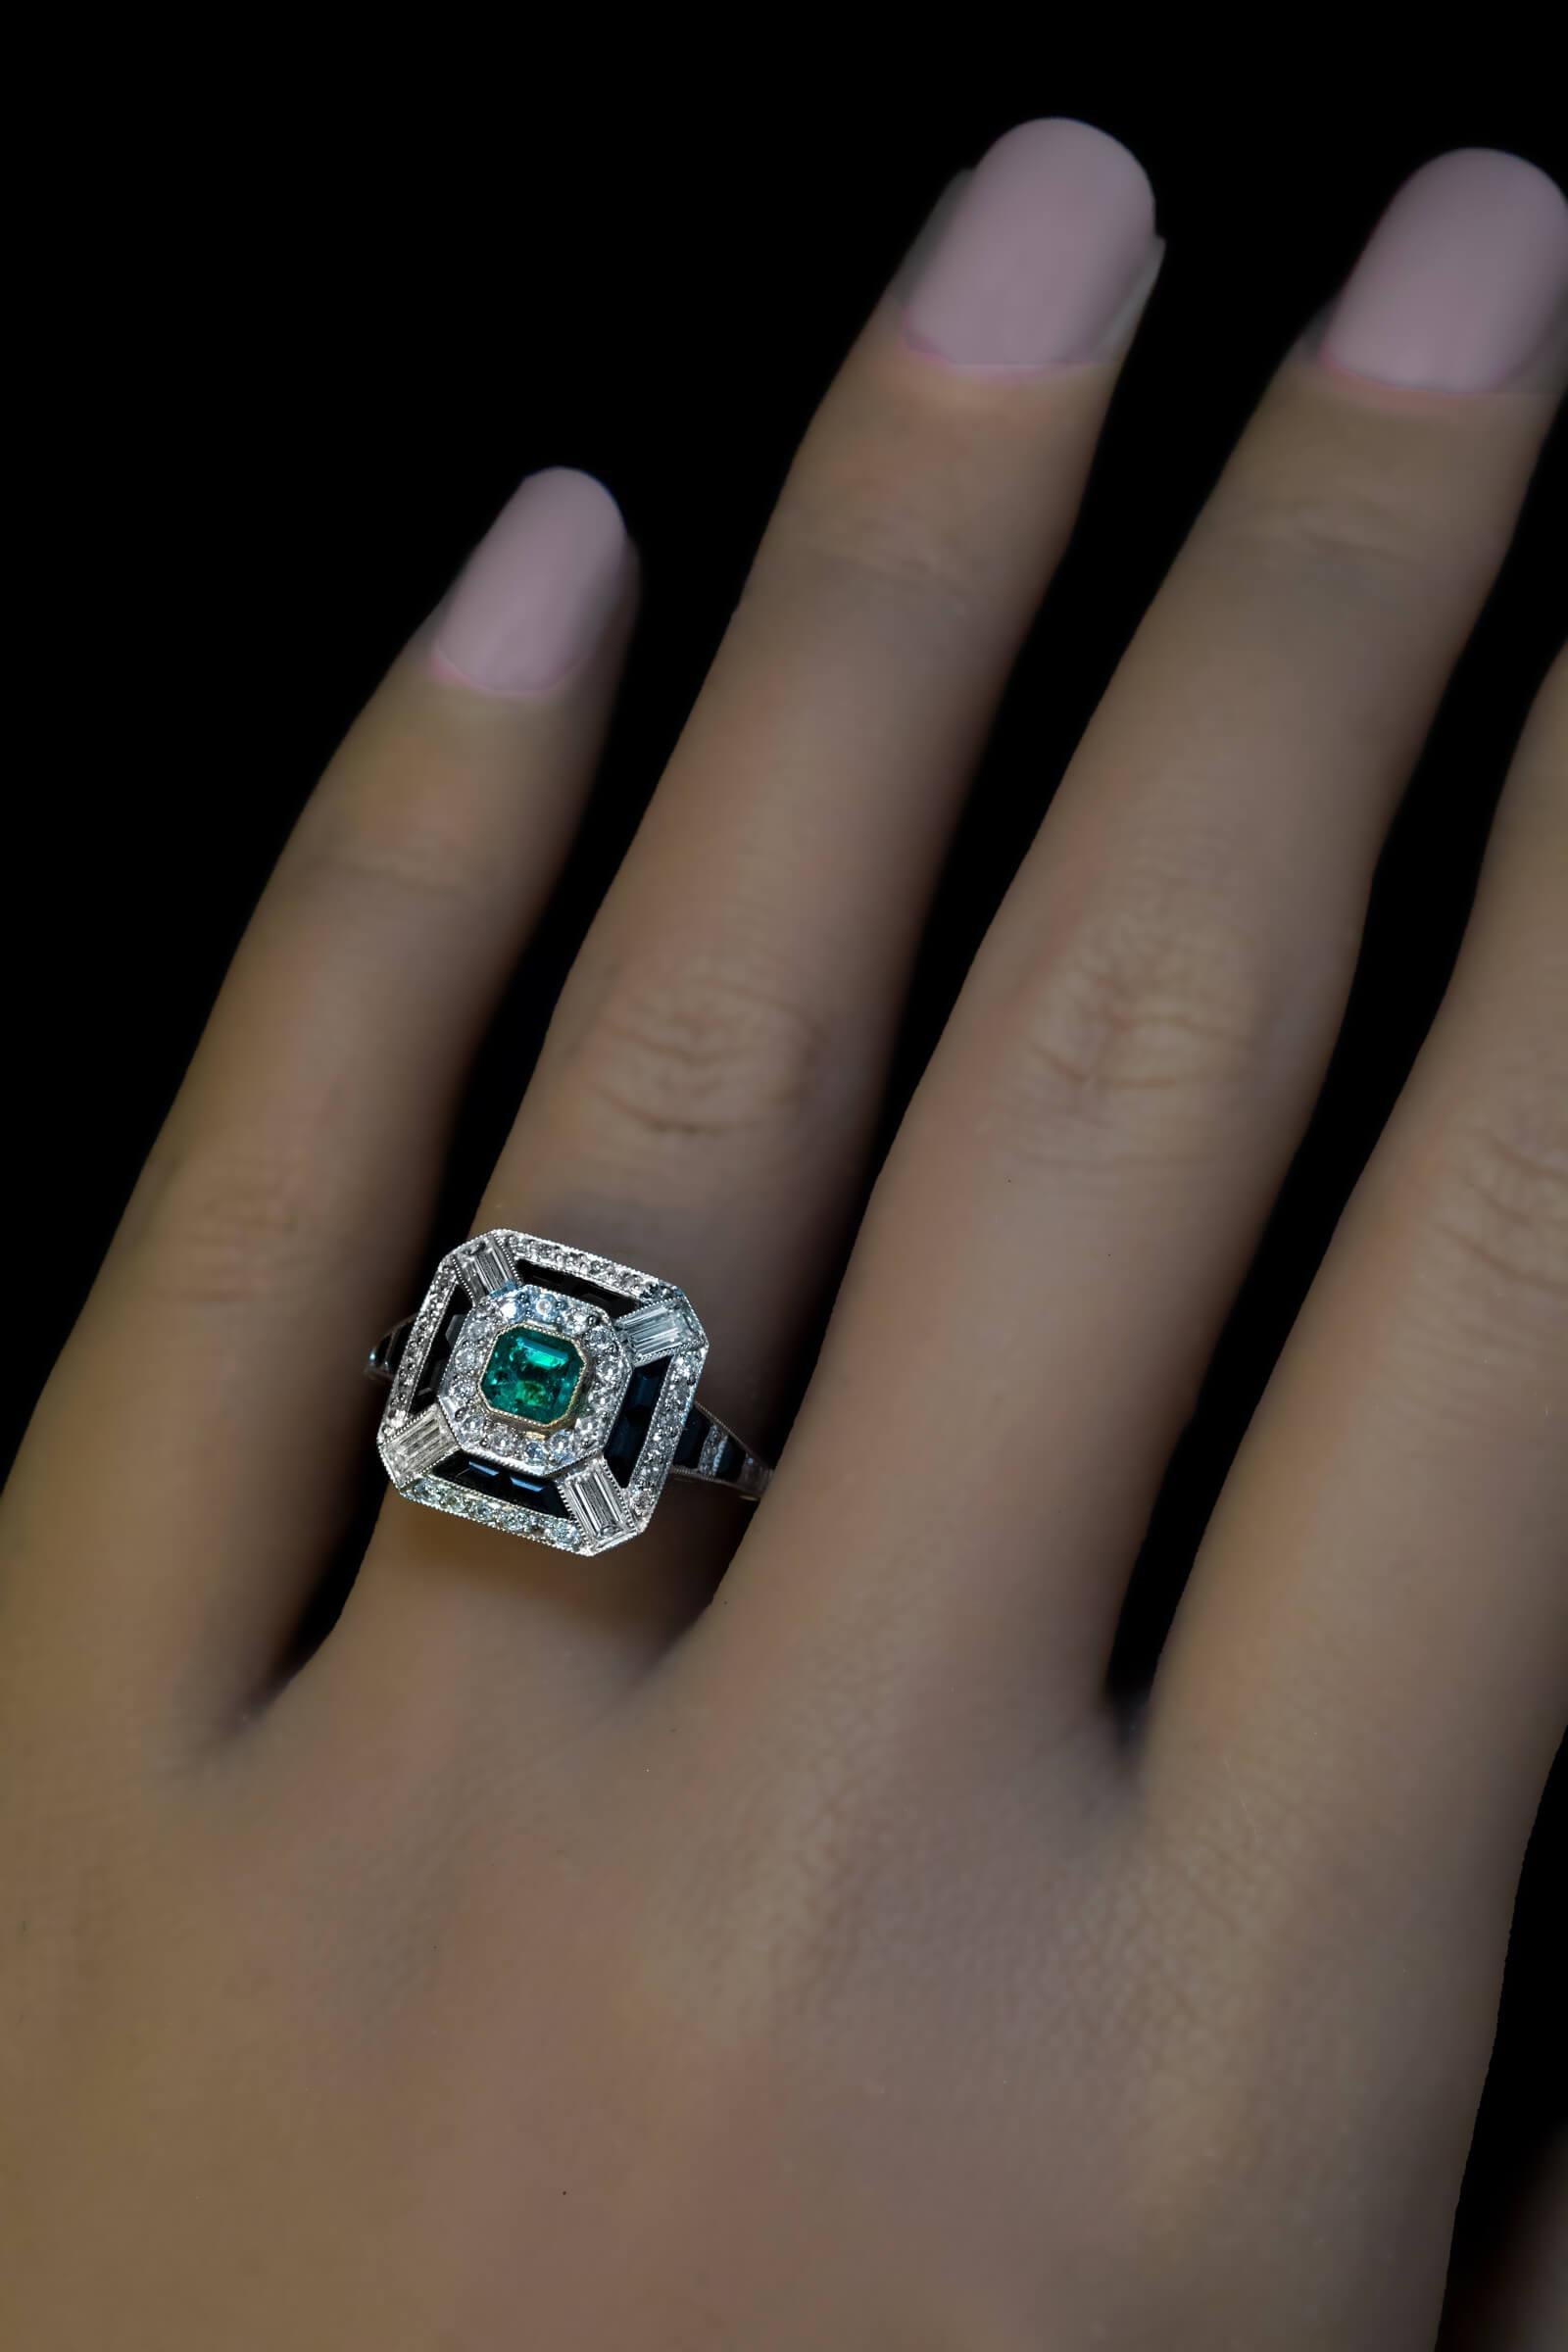 Circa 1920s  This elaborate pyramid shaped platinum ring of a bold Art Deco design is centered with a vivid bluish green emerald (likely Colombian) set in a yellow gold bezel. The emerald is framed by round and baguette cut diamonds and calibre cut